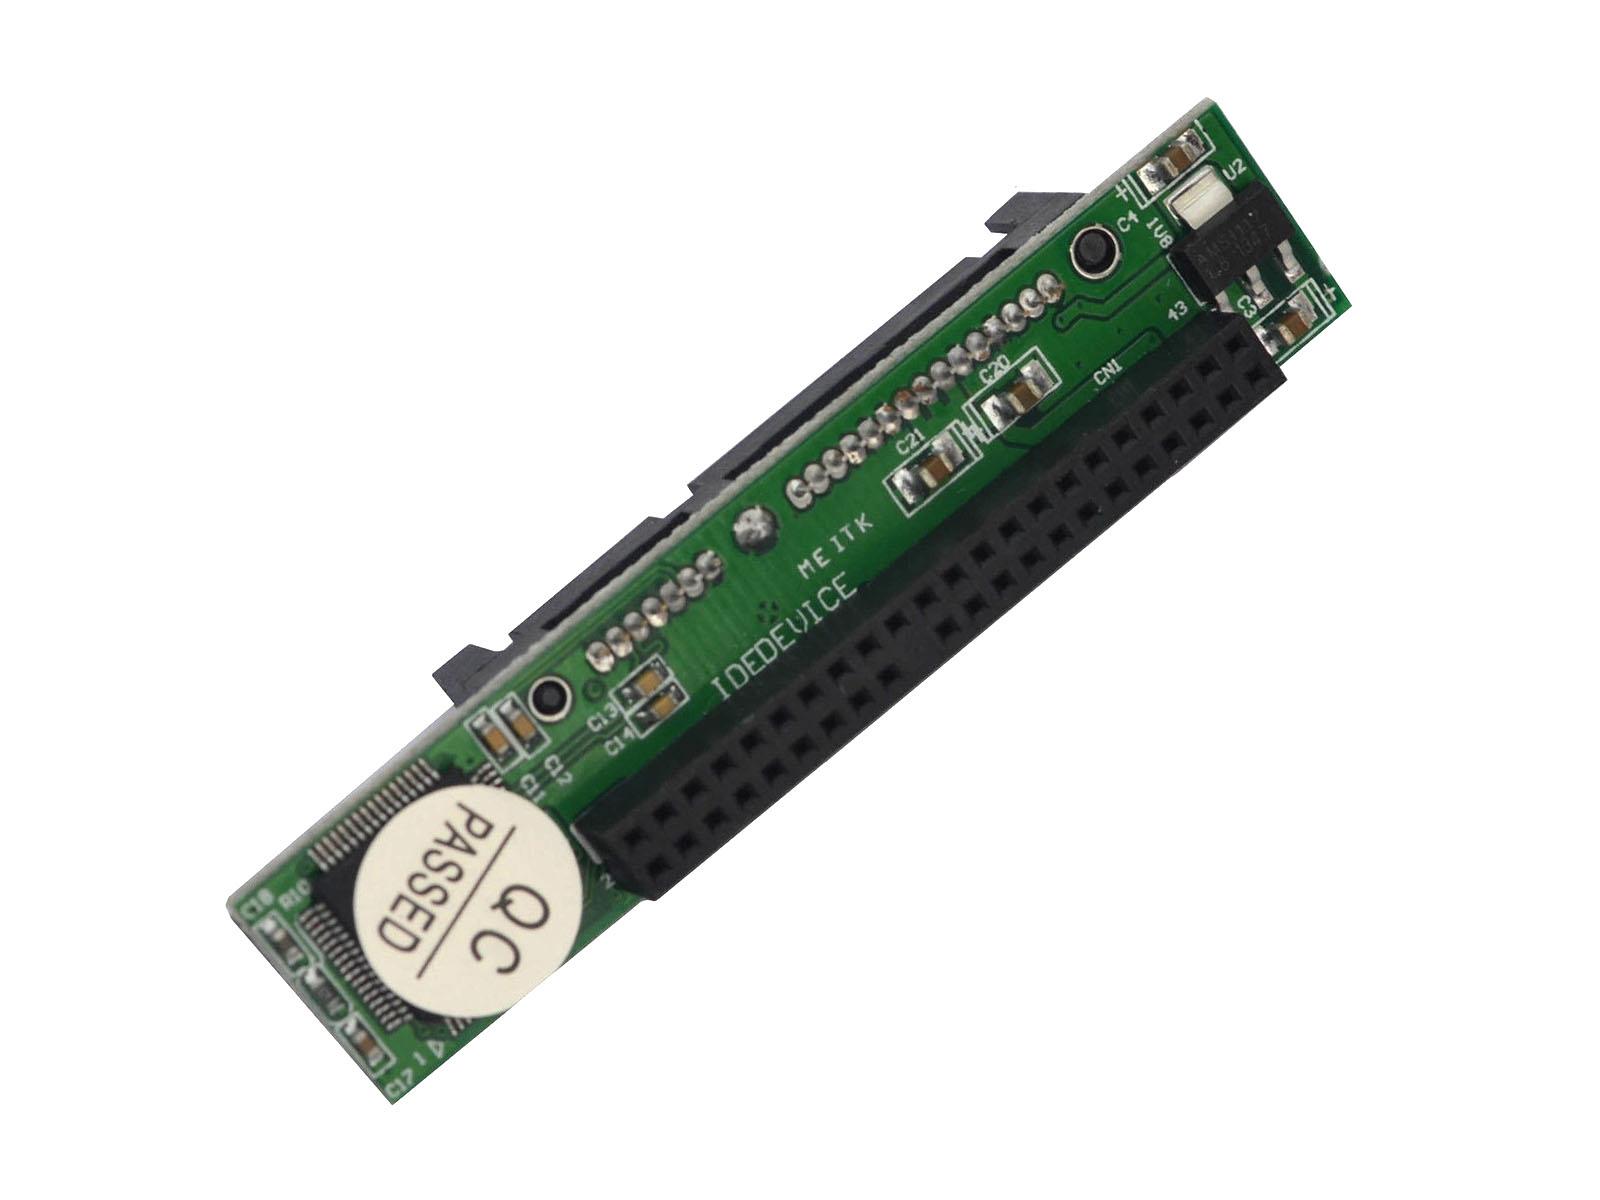 2.5" IDE to SATA adapter